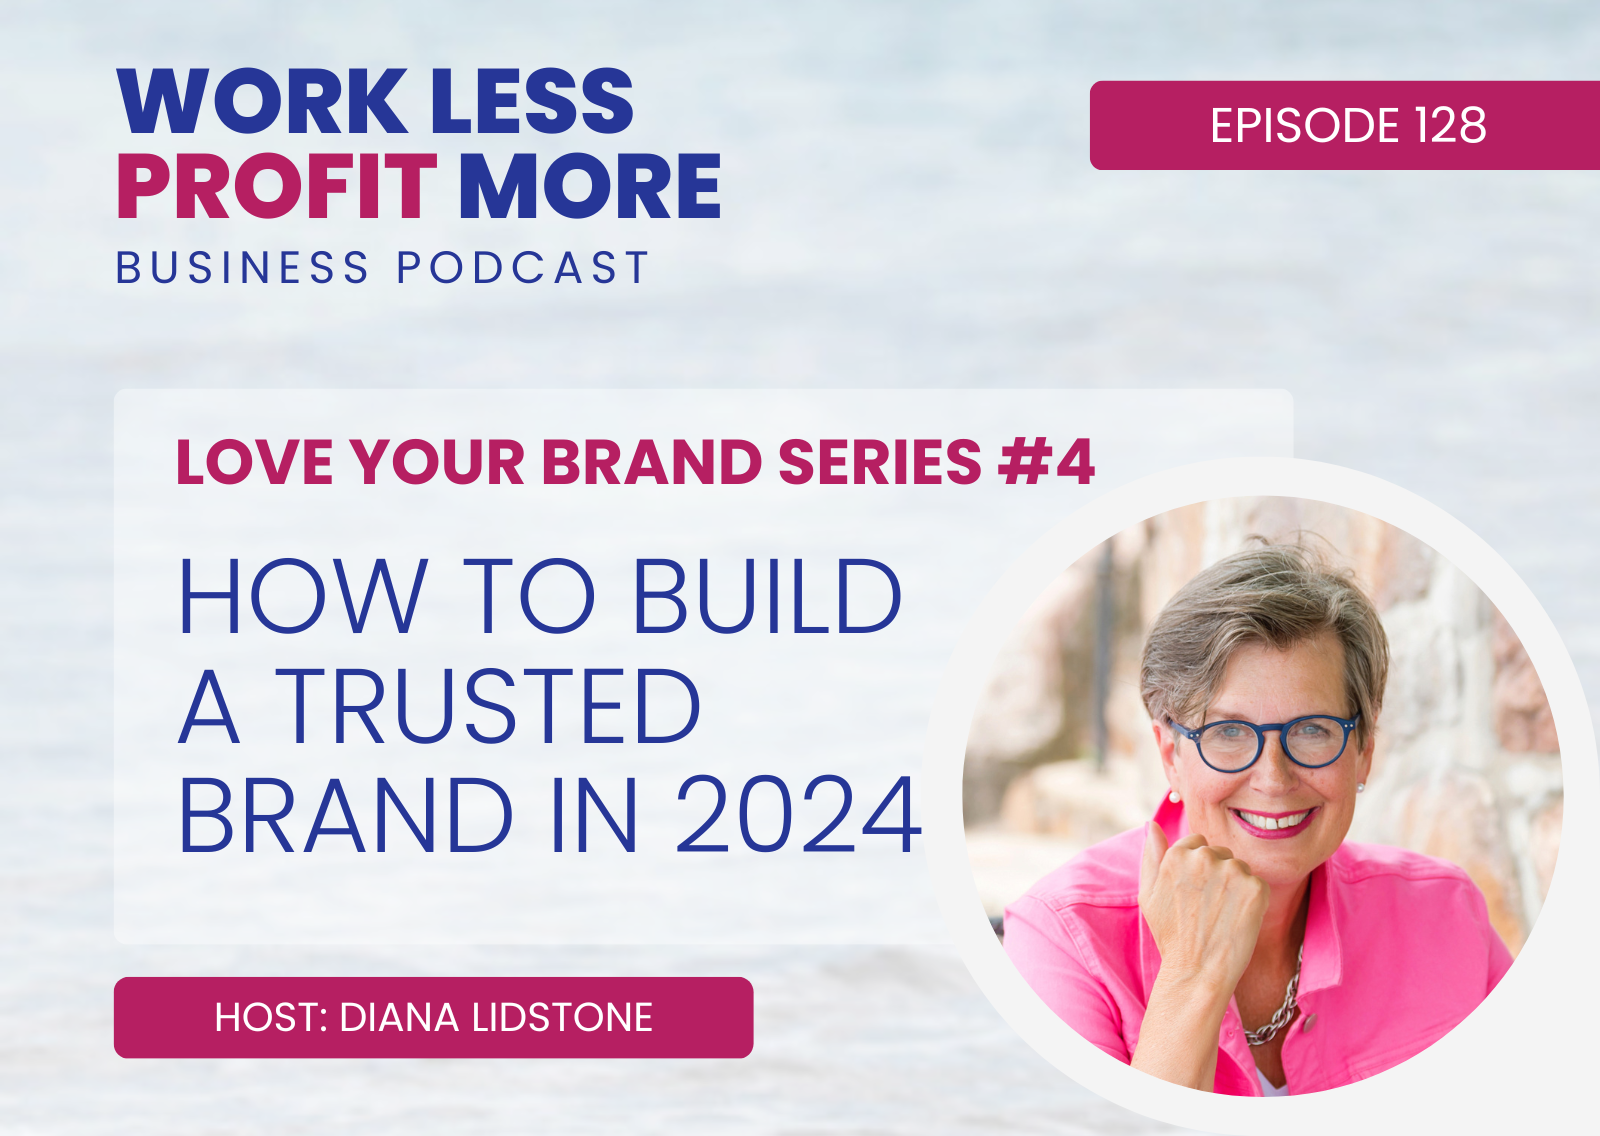 How to Build a Trusted Brand in 2024